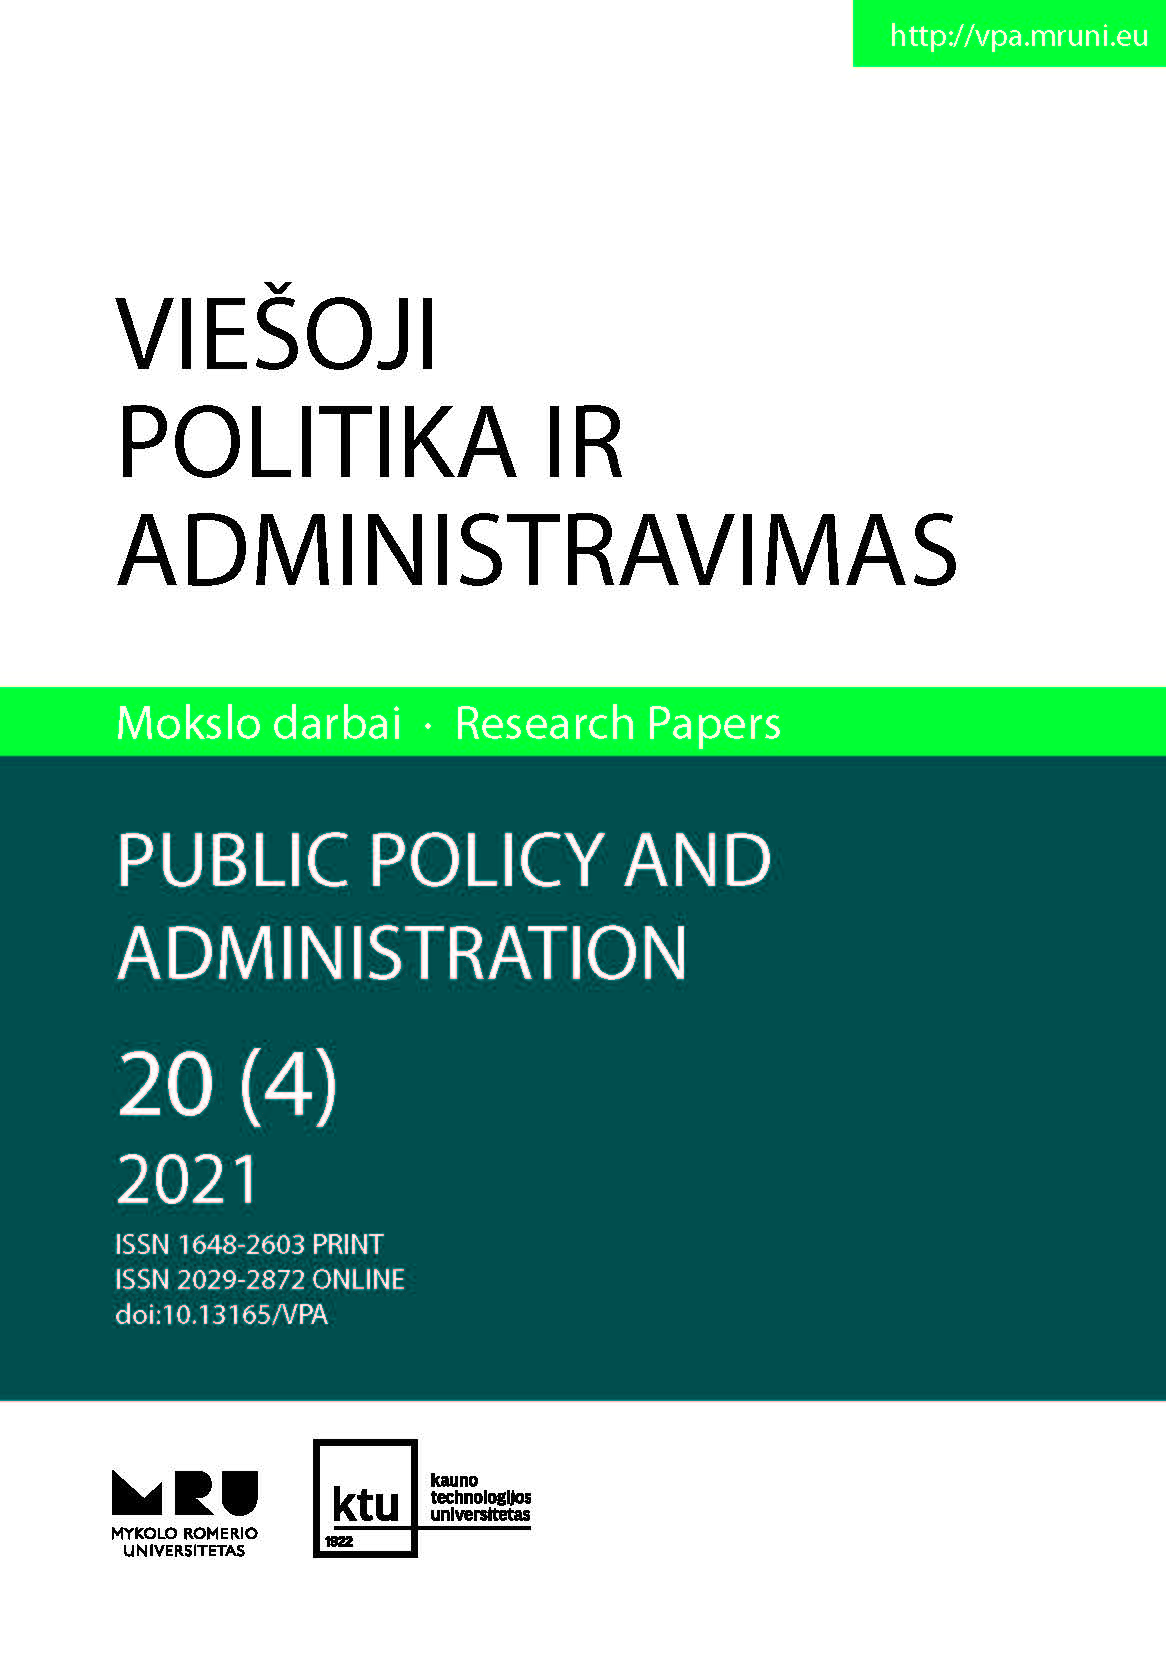 ANTI-CORRUPTION MONITORING IN THE PUBLIC PROCUREMENT MANAGEMENT SYSTEM IN THE REPUBLIC OF KAZAKHSTAN